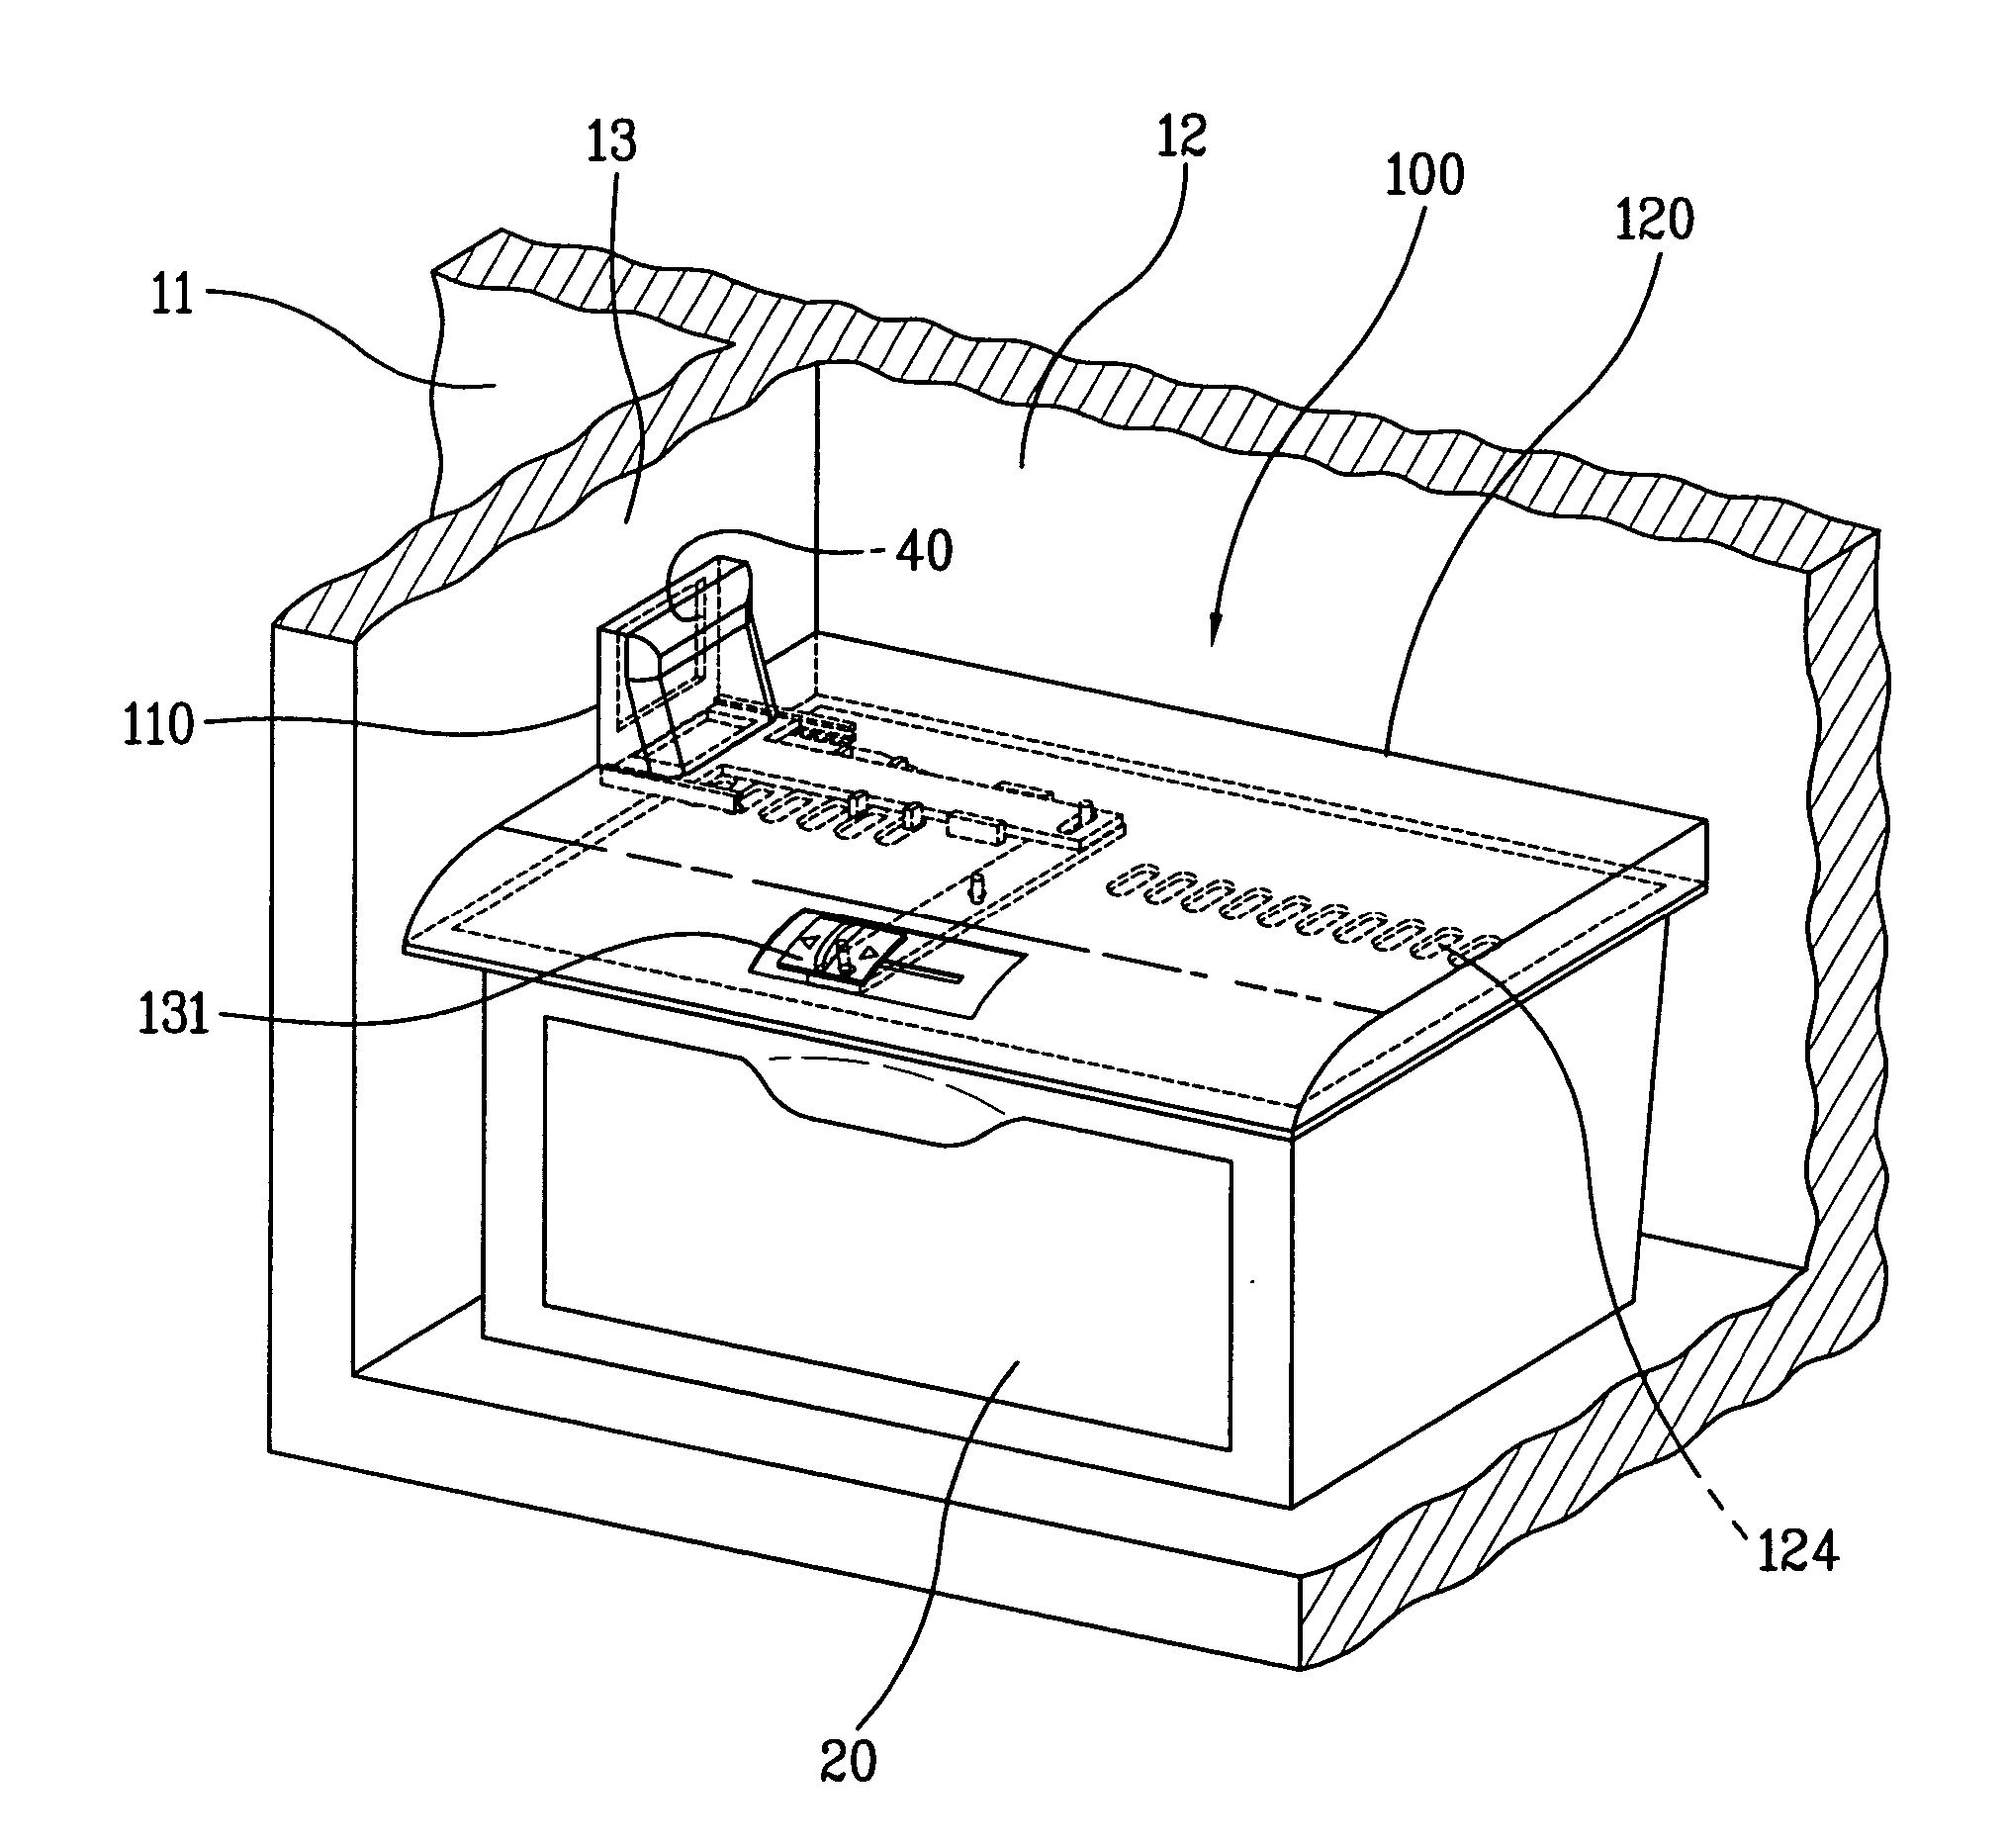 Cooling air supply apparatus of refrigerator